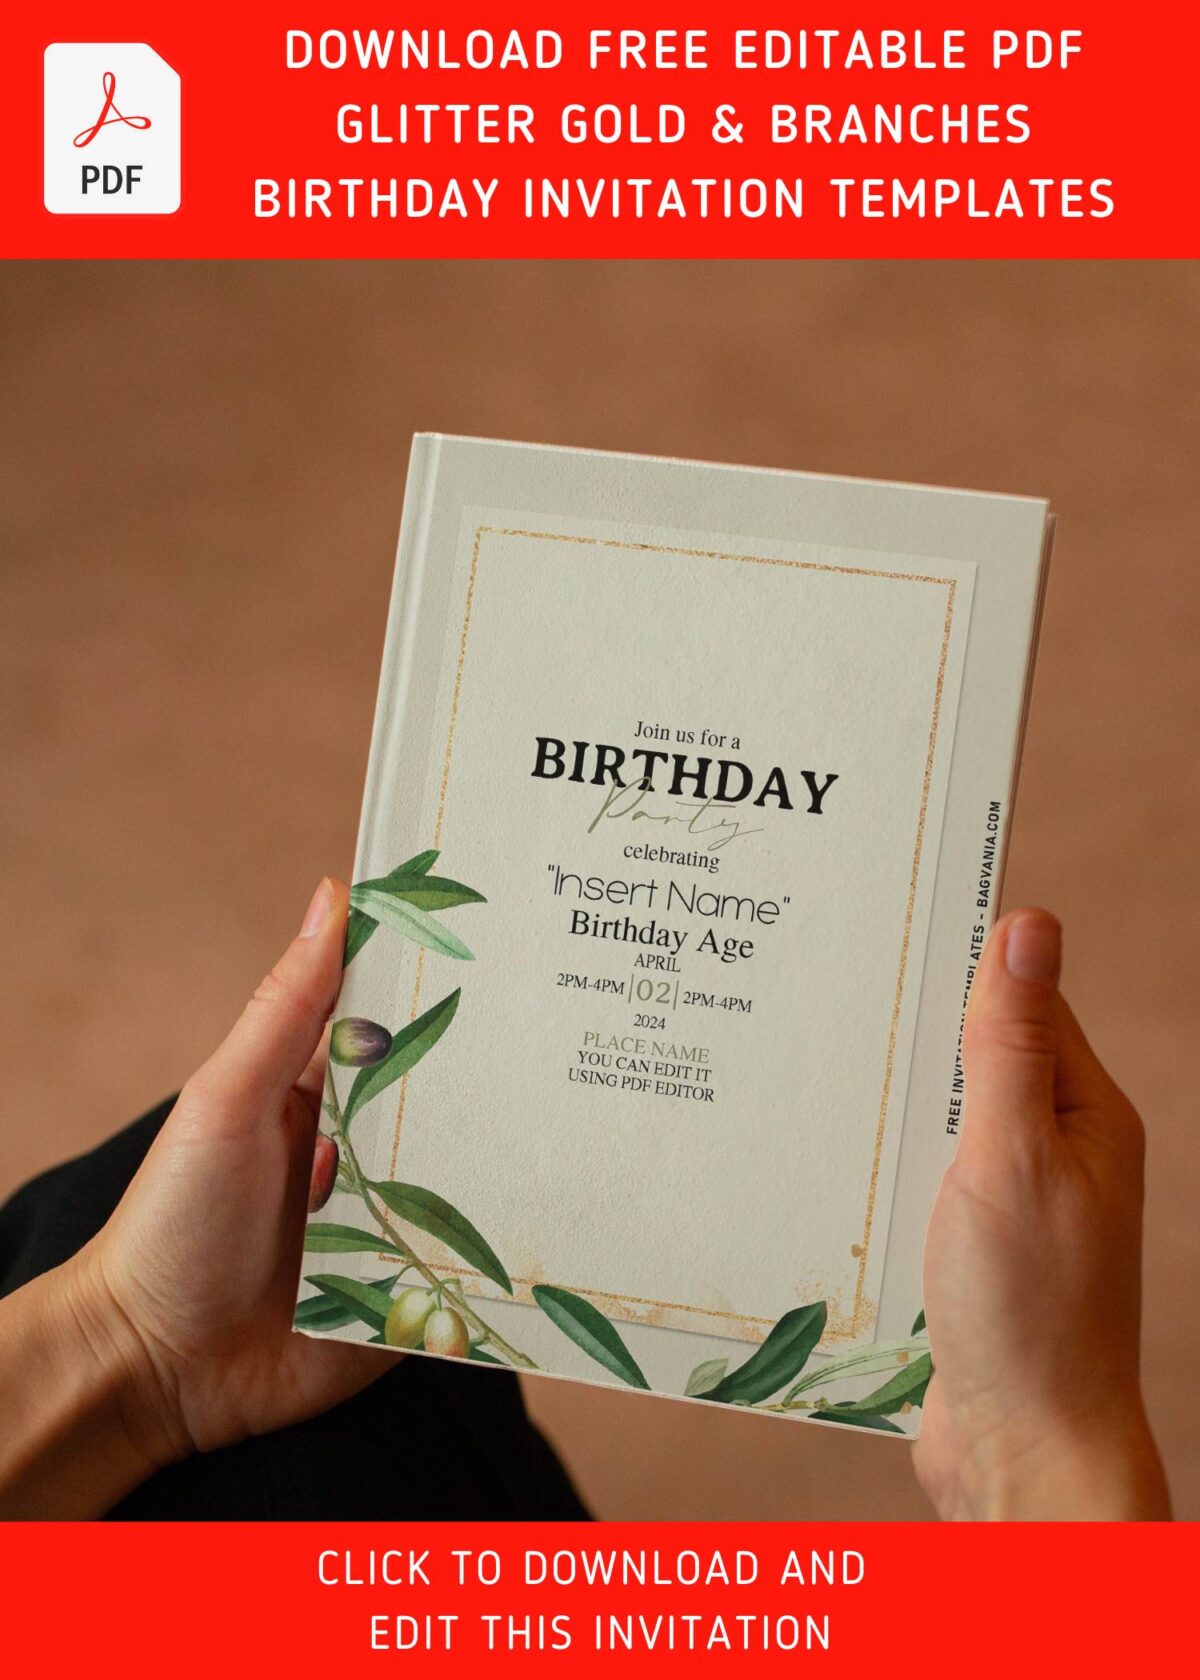 (Free Editable PDF) Glitter Gold Frame & Branches Birthday Invitation Templates with greenery vines